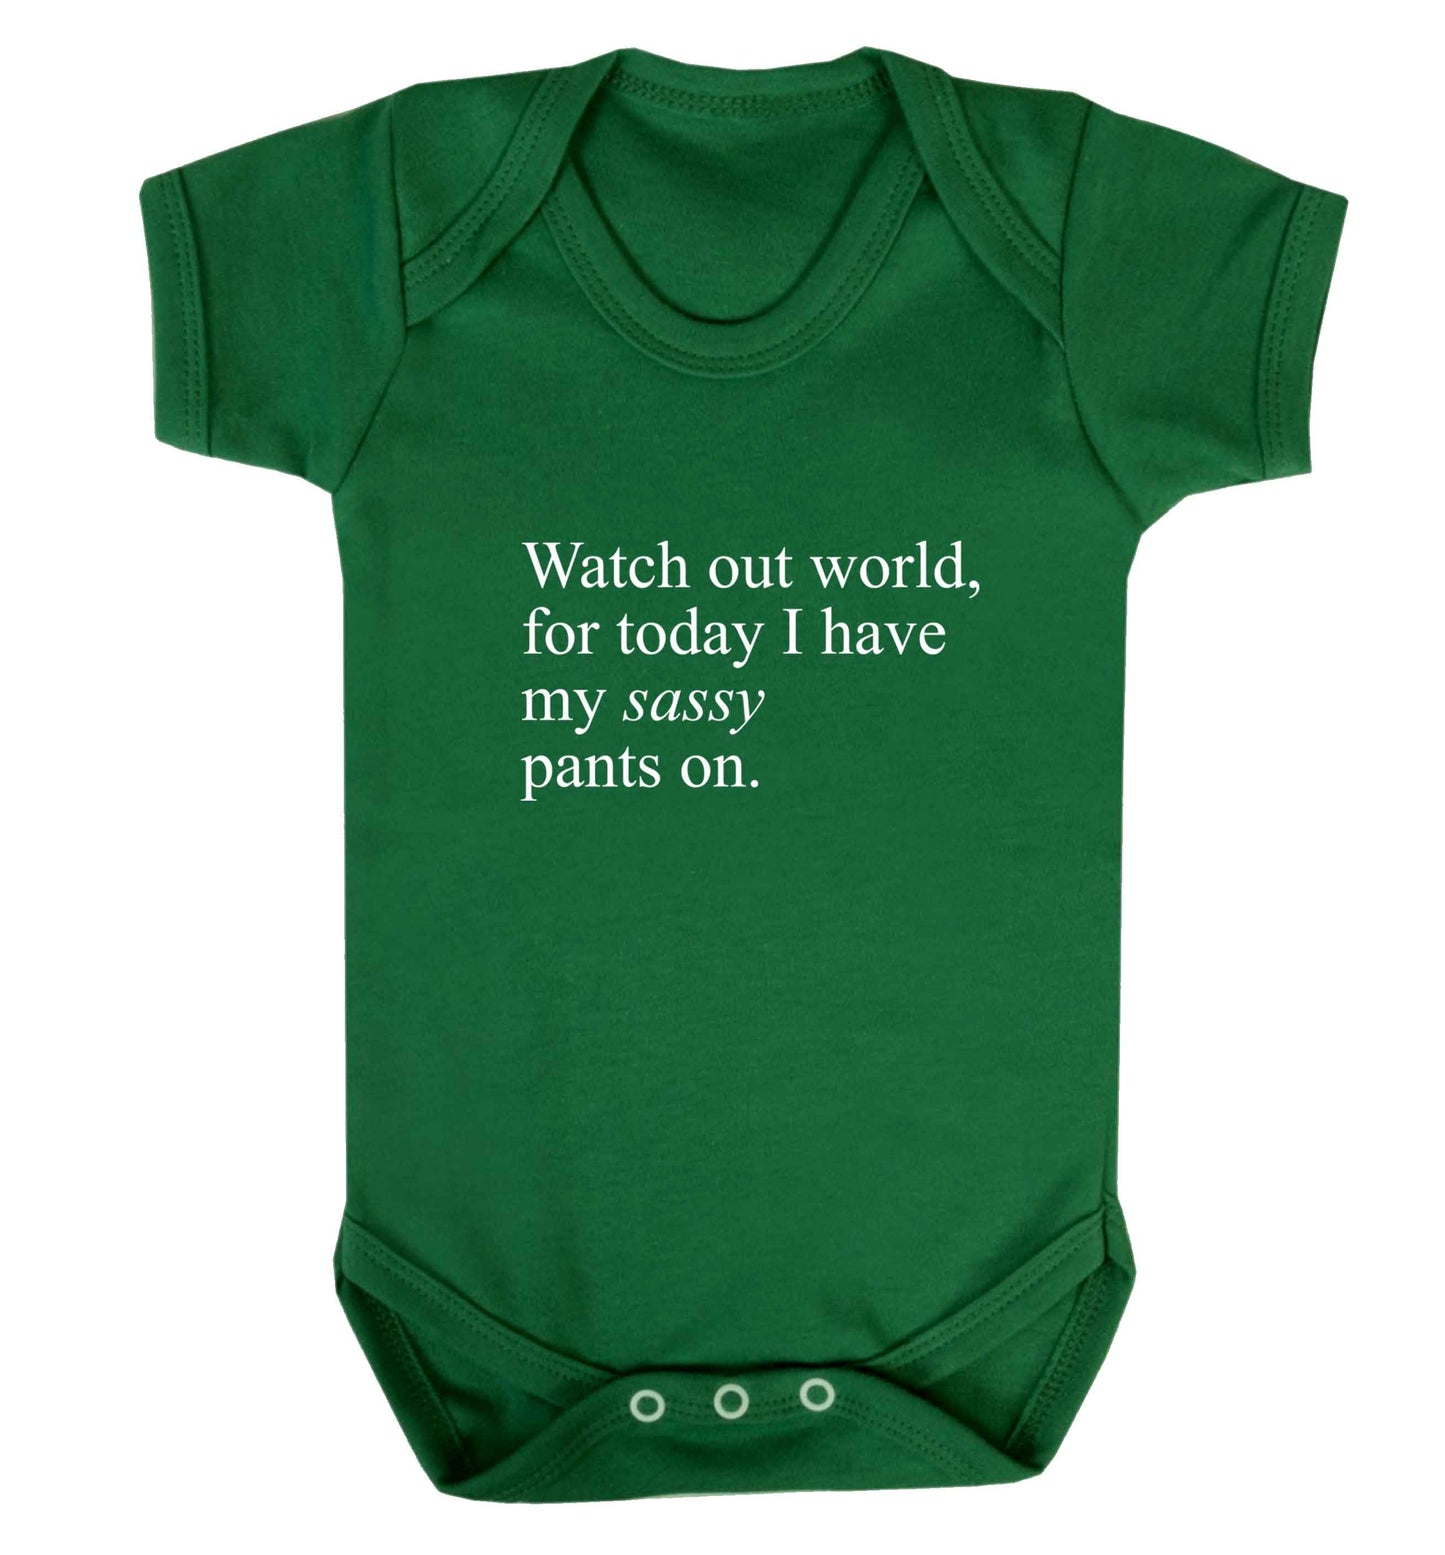 Watch out world for today I have my sassy pants on baby vest green 18-24 months